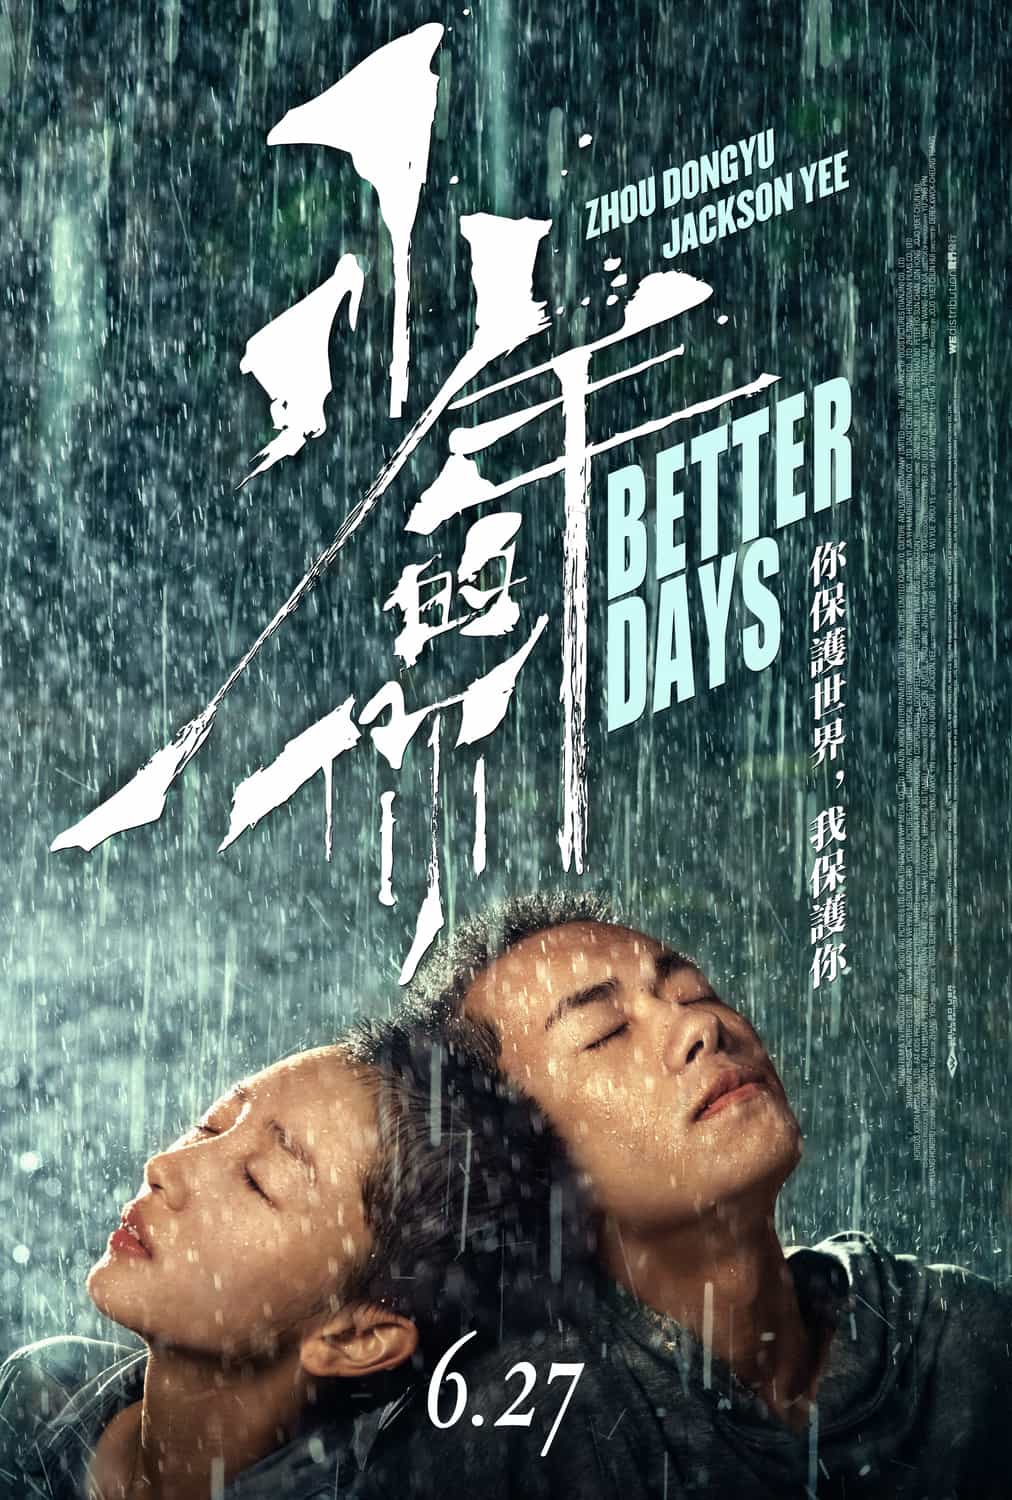 World Box Office Analysis 25th - 27th October 2019:  Chinese film Better Days tops the chart as the only new film this weekend with Maleficent falling to number two